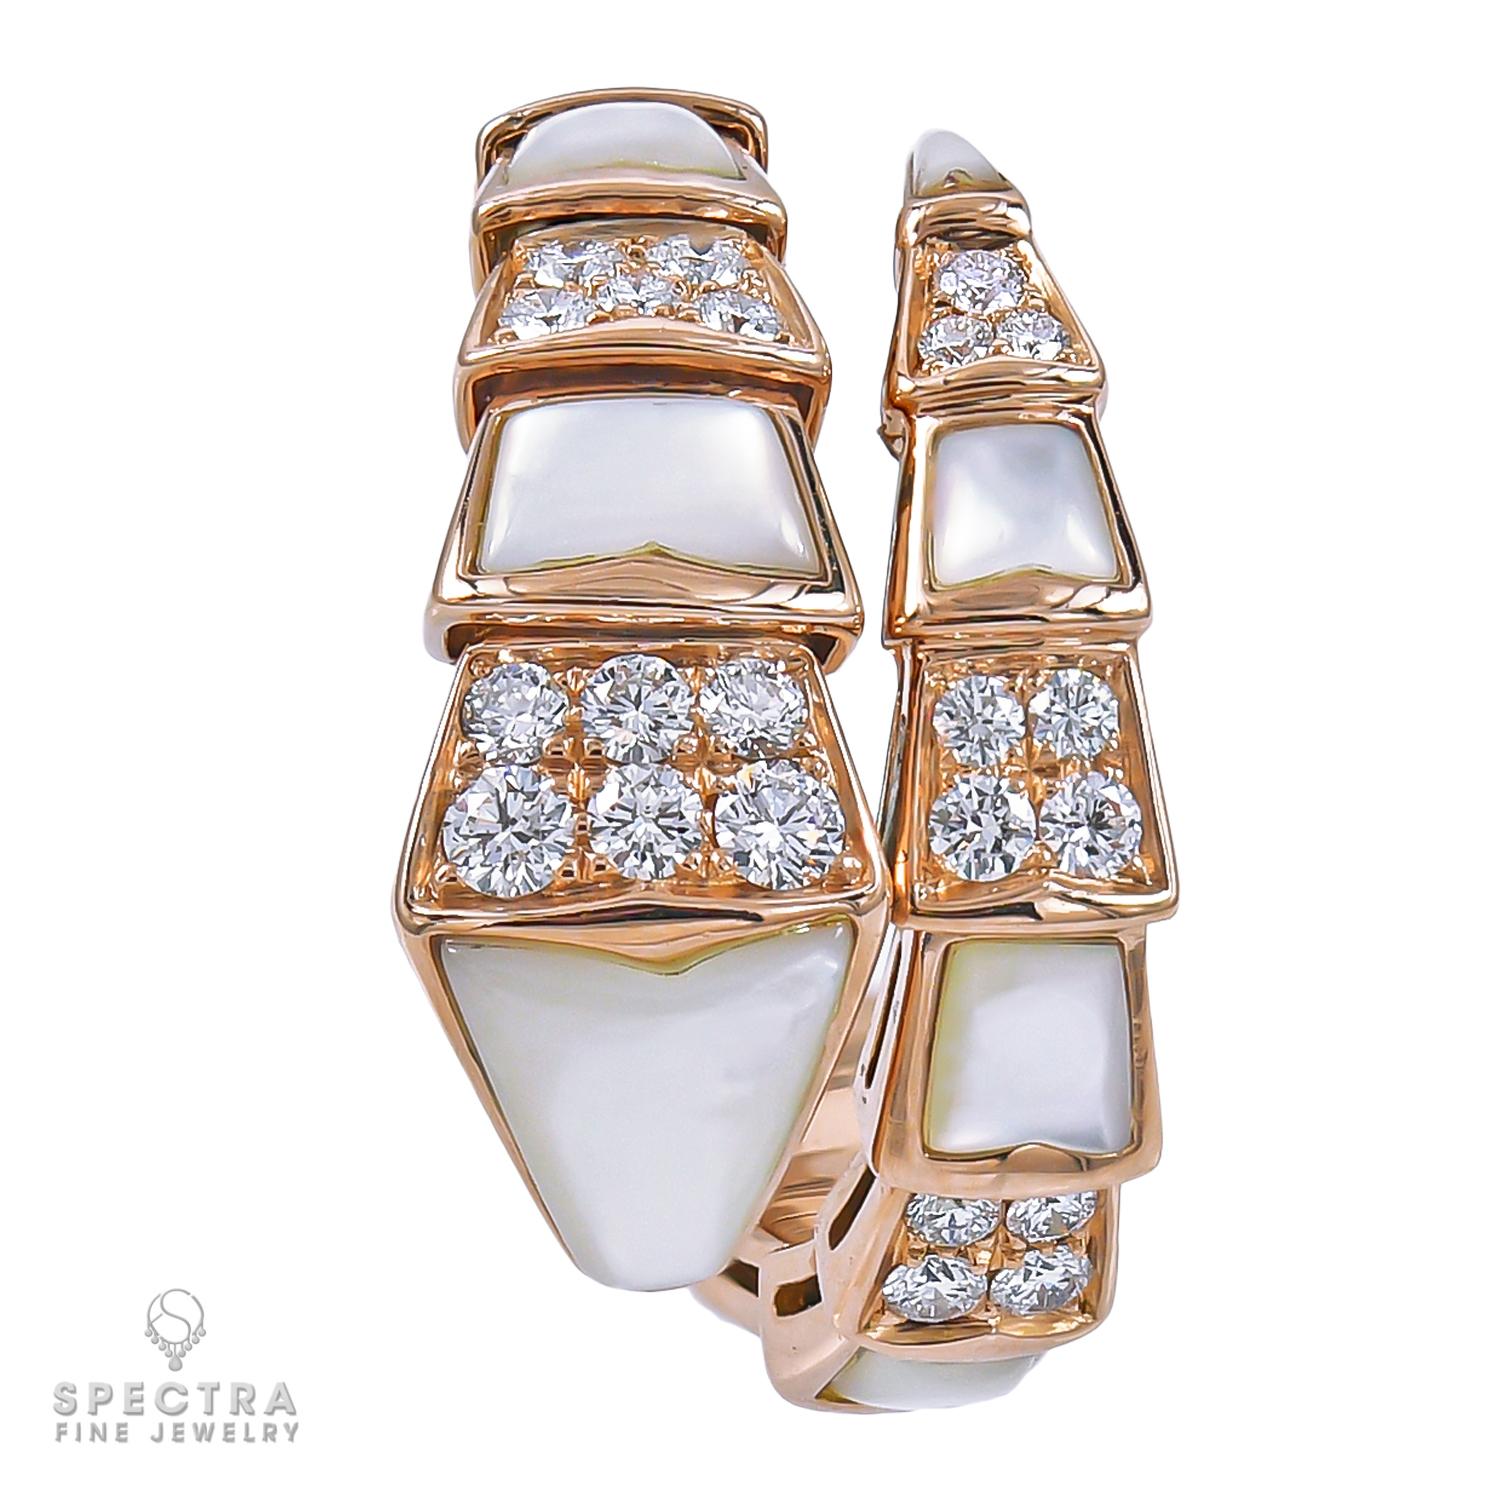 A Bulgari Viper ring made with diamonds and mother-of-pearl.
18k rose gold, gross weight is 10.11 gr.
Stretchable, size L, fits sizes 6.5-8.
Serial number will be provided to potential buyers.
Comes with a Bulgari box.